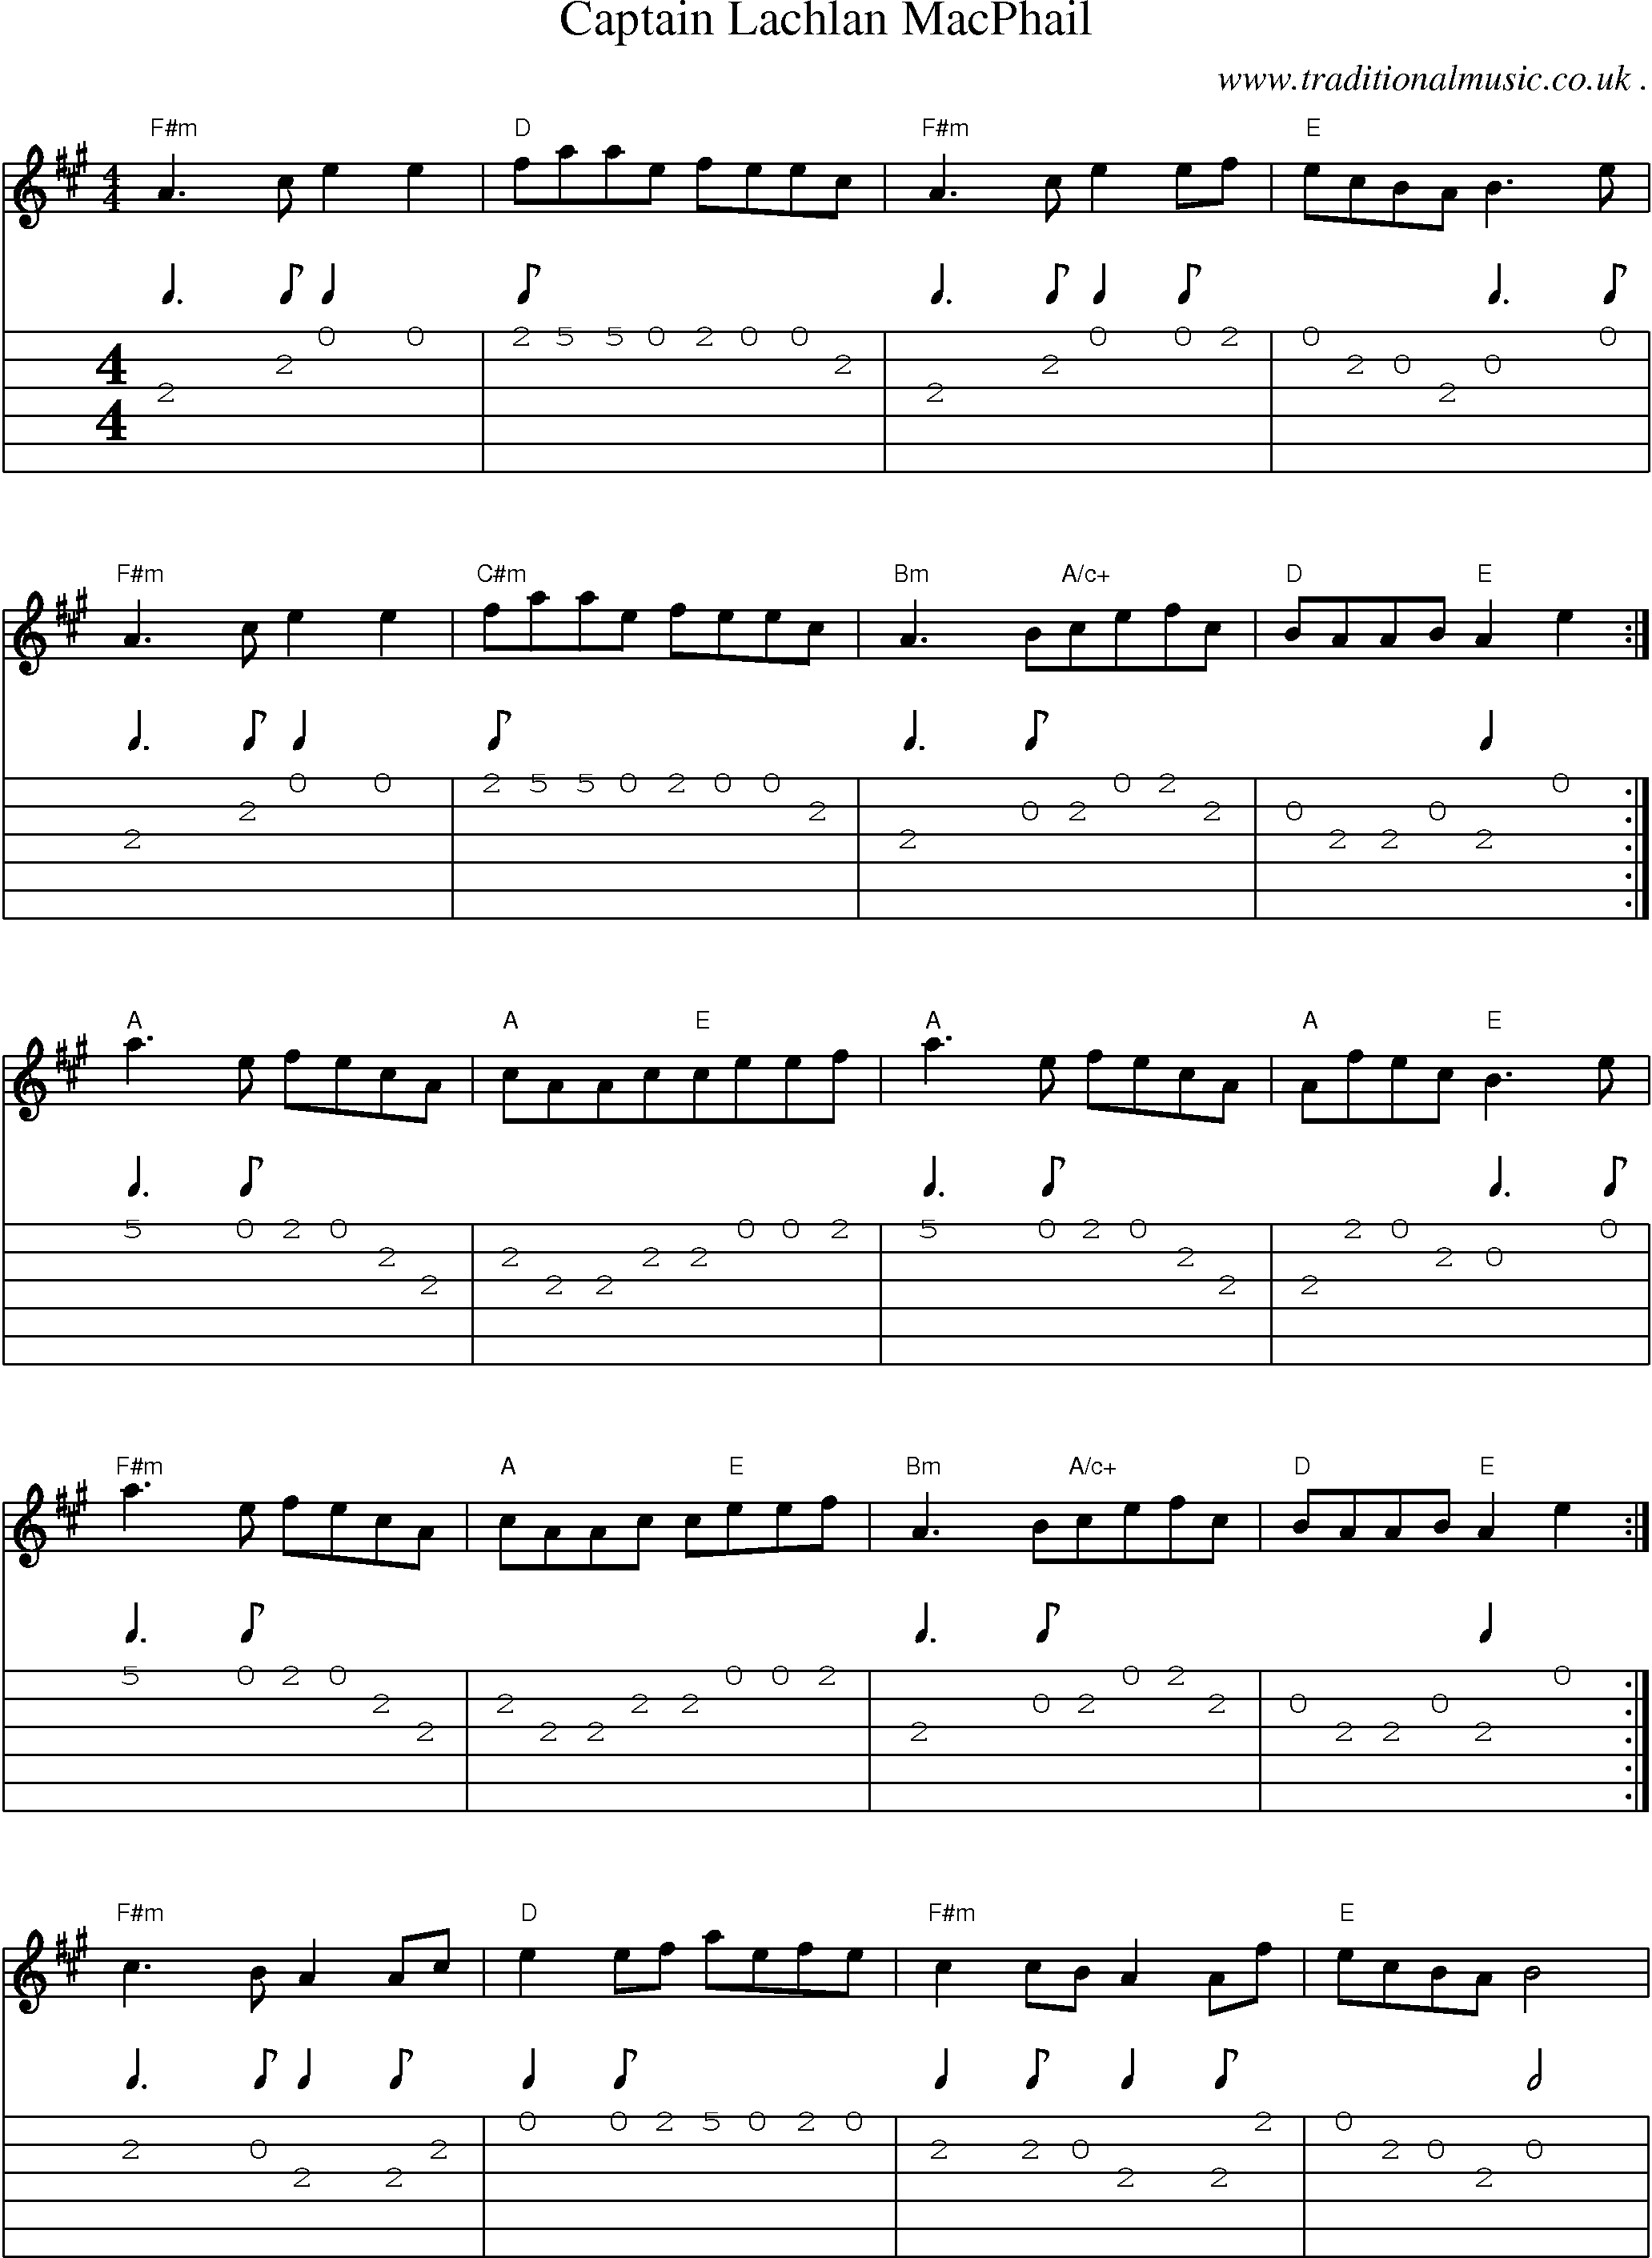 Sheet-Music and Guitar Tabs for Captain Lachlan Macphail